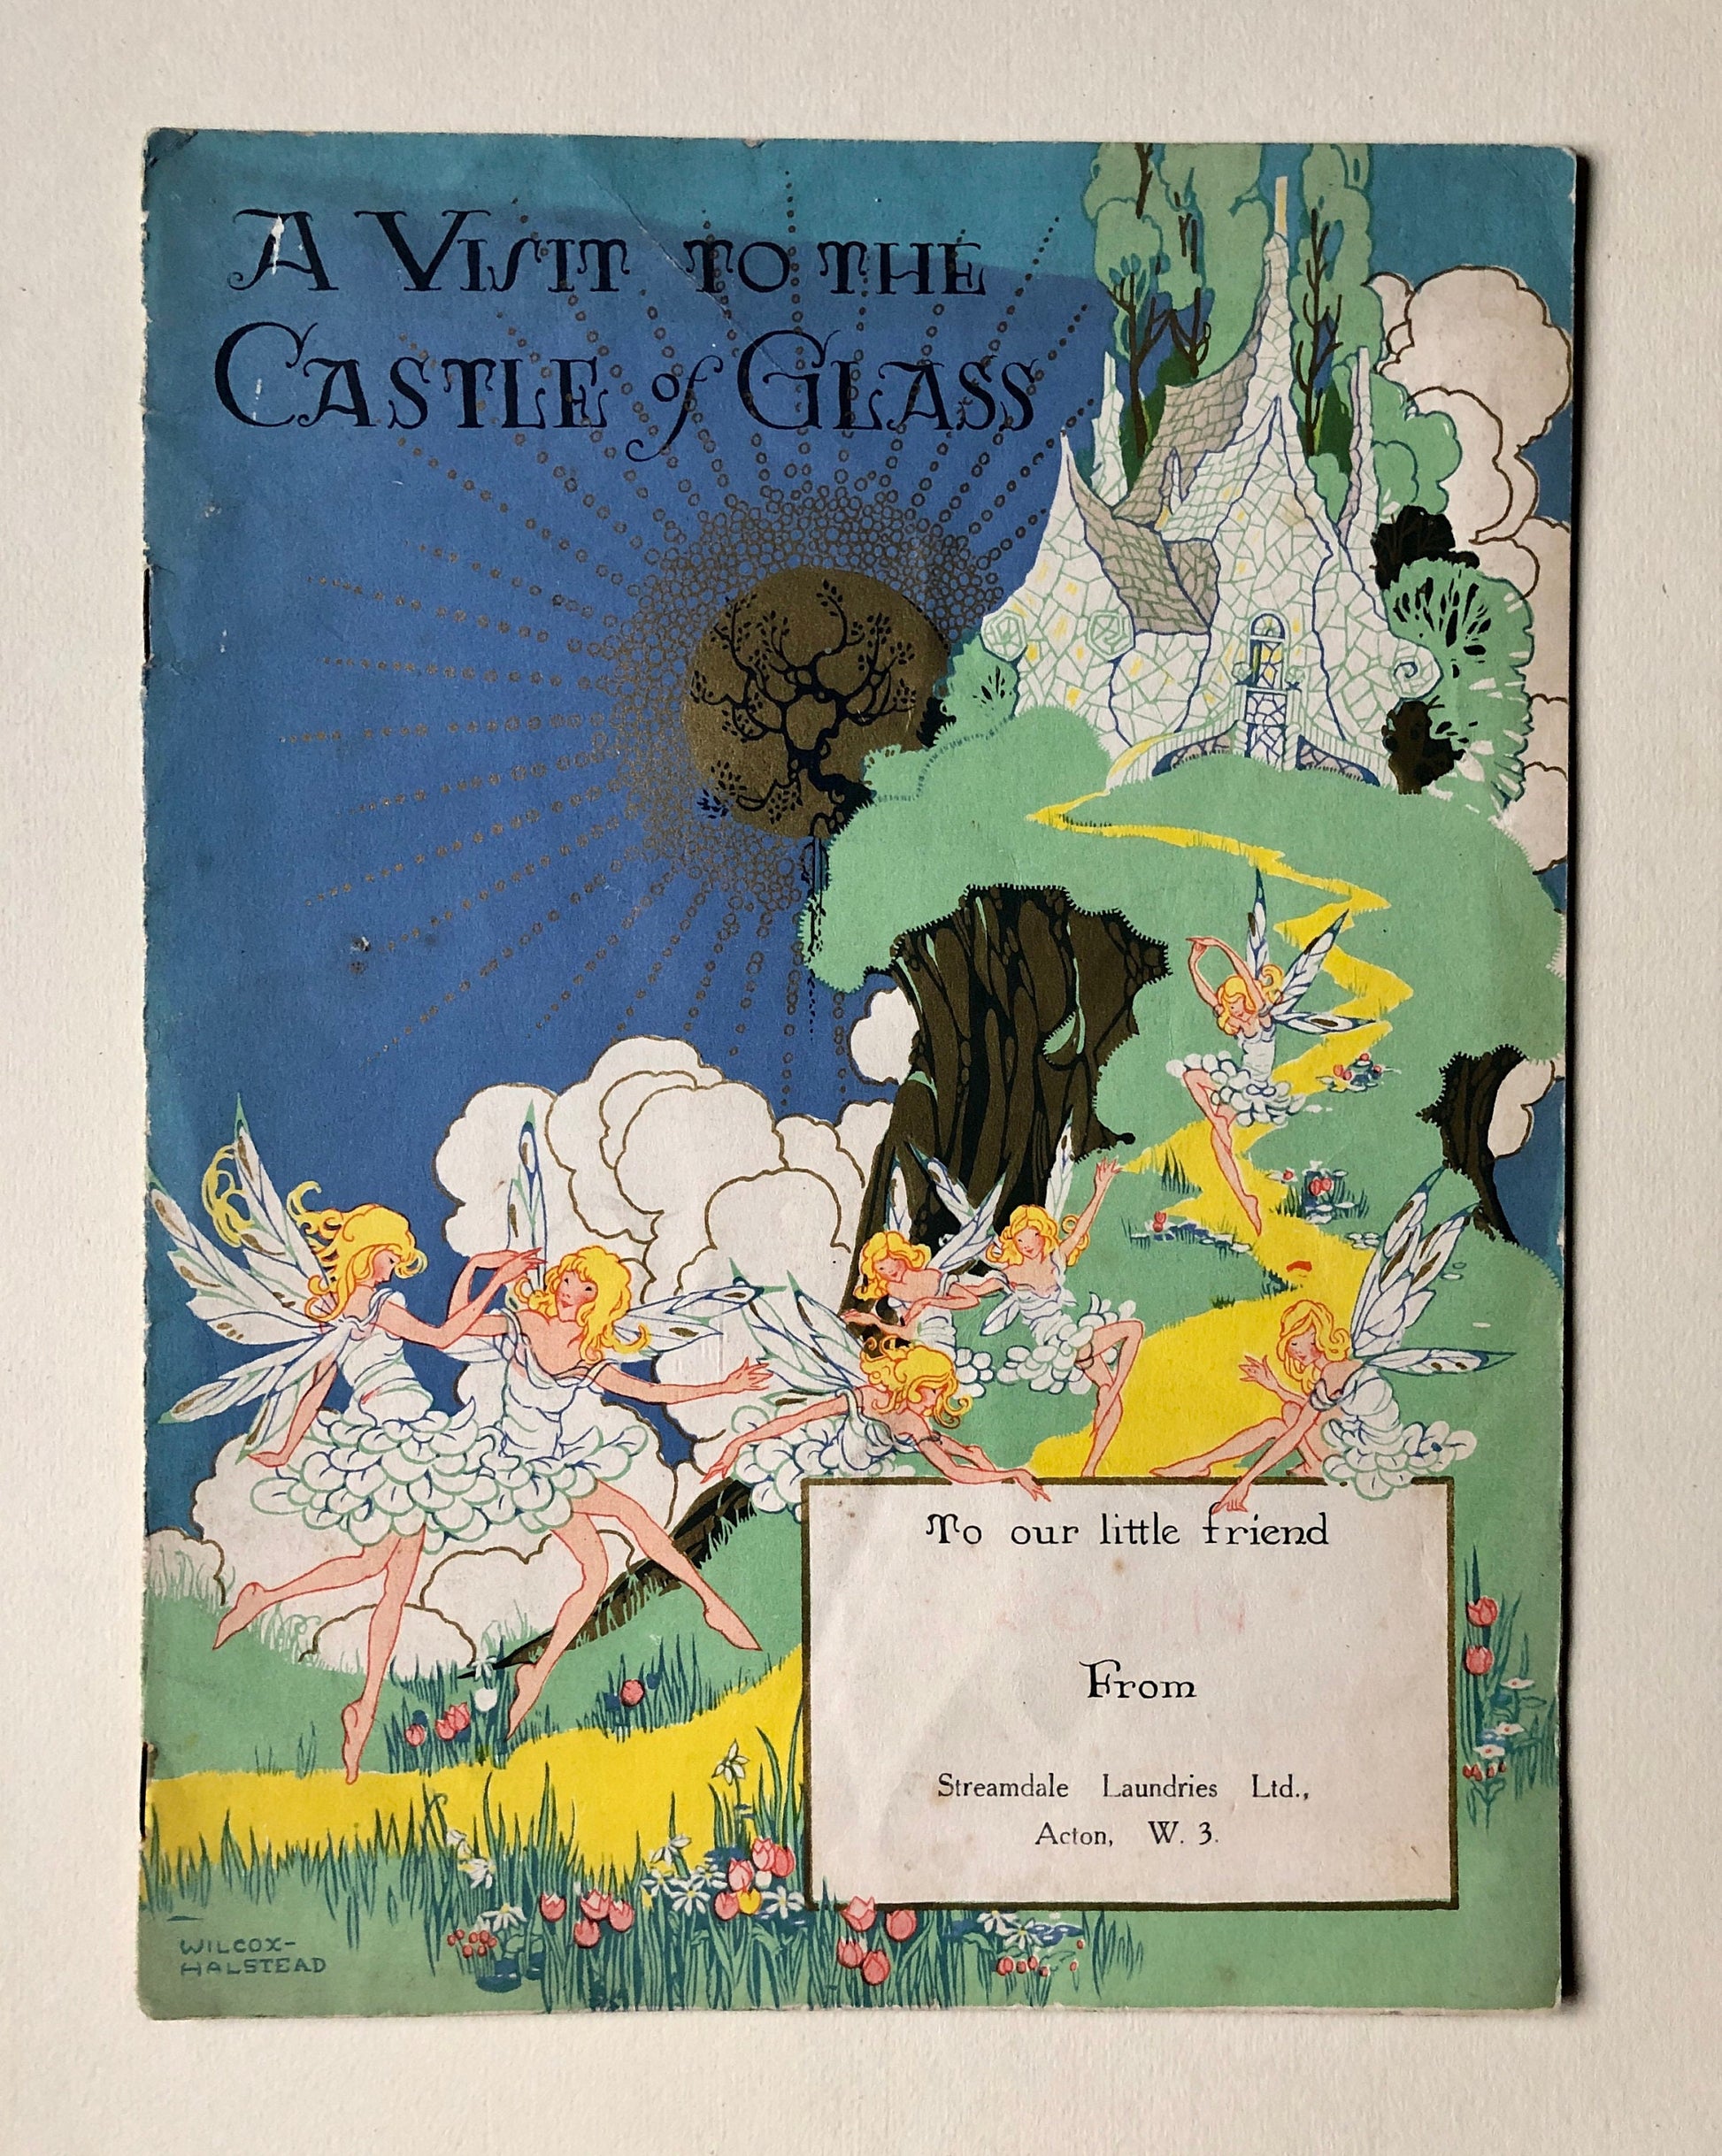 A Visit To The Castle of Glass. An 8 Page Advertising Booklet From Steamdale Laundries Limited. Illustrated by Wilcox-Halstead. 1920’s.